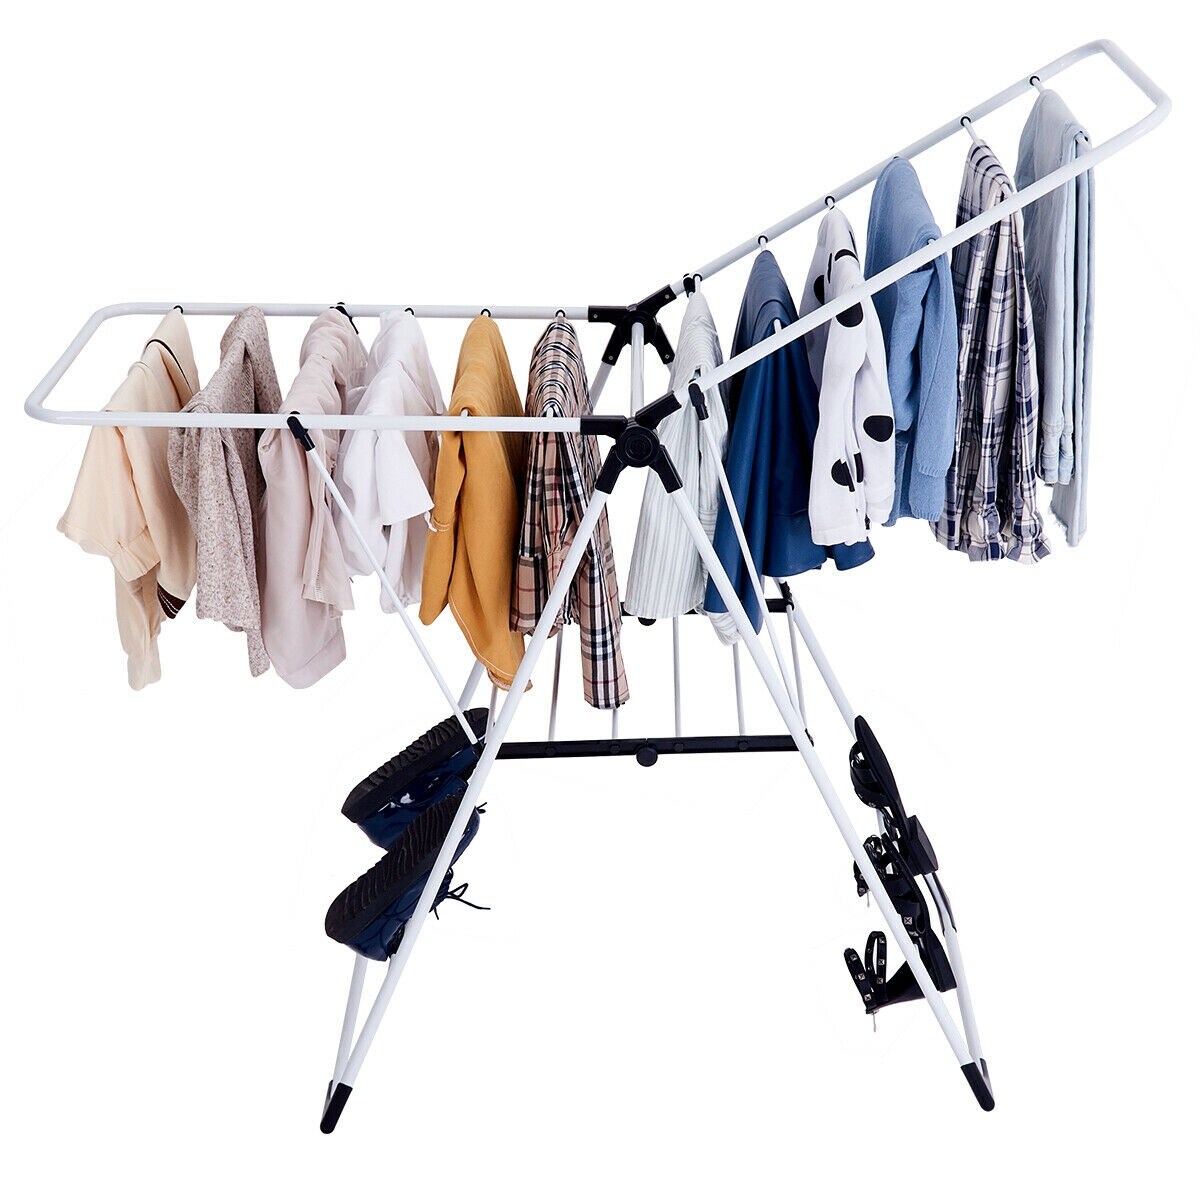 https://ak1.ostkcdn.com/images/products/is/images/direct/ce986ad0af1dc1506adc4ee4486c683988aab188/Costway-Laundry-Clothes-Storage-Drying-Rack-Portable-Folding-Dryer.jpg